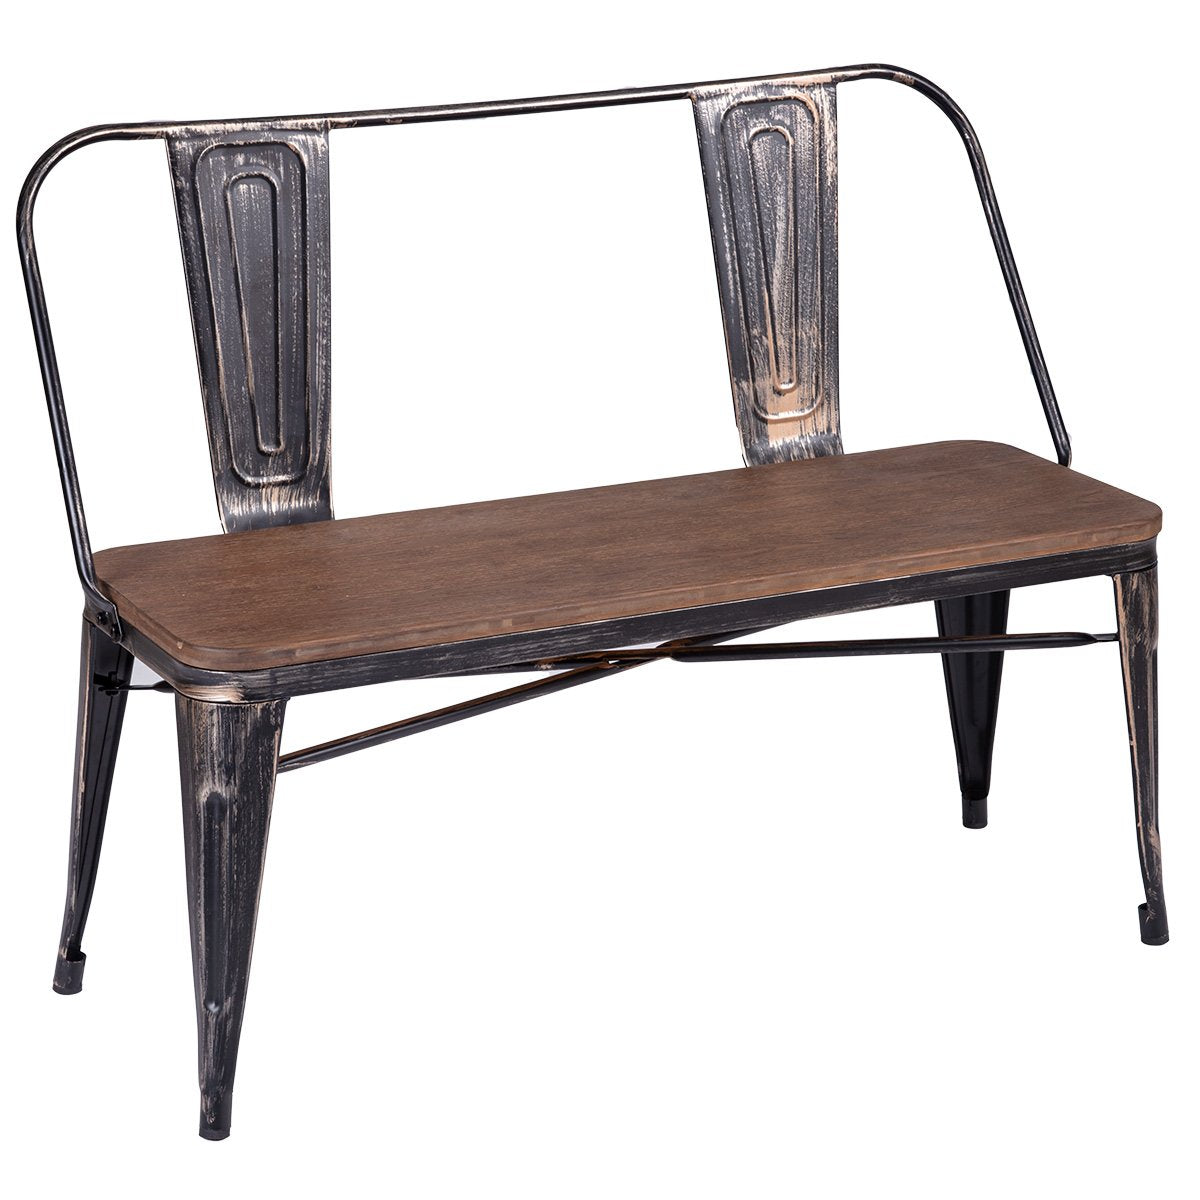 Rustic Vintage Style Distressed Dining Table Bench with Wooden Seat Panel and Metal Backrest & Legs